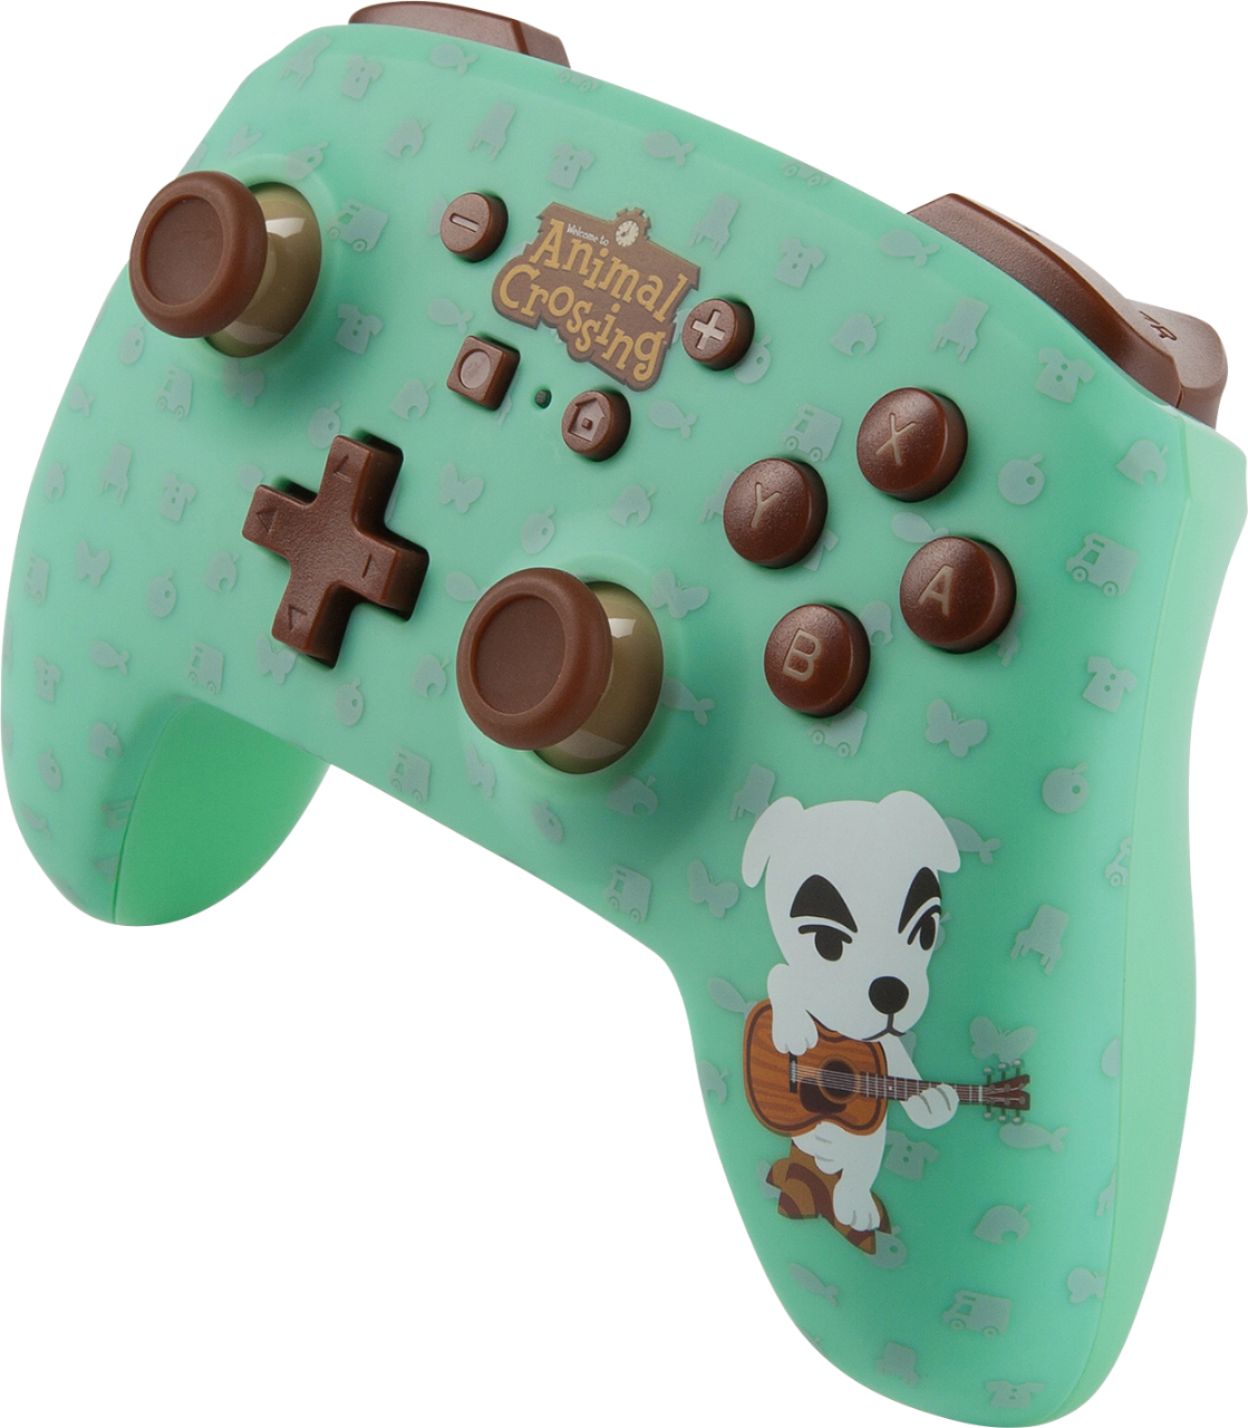 animal crossing power a controller